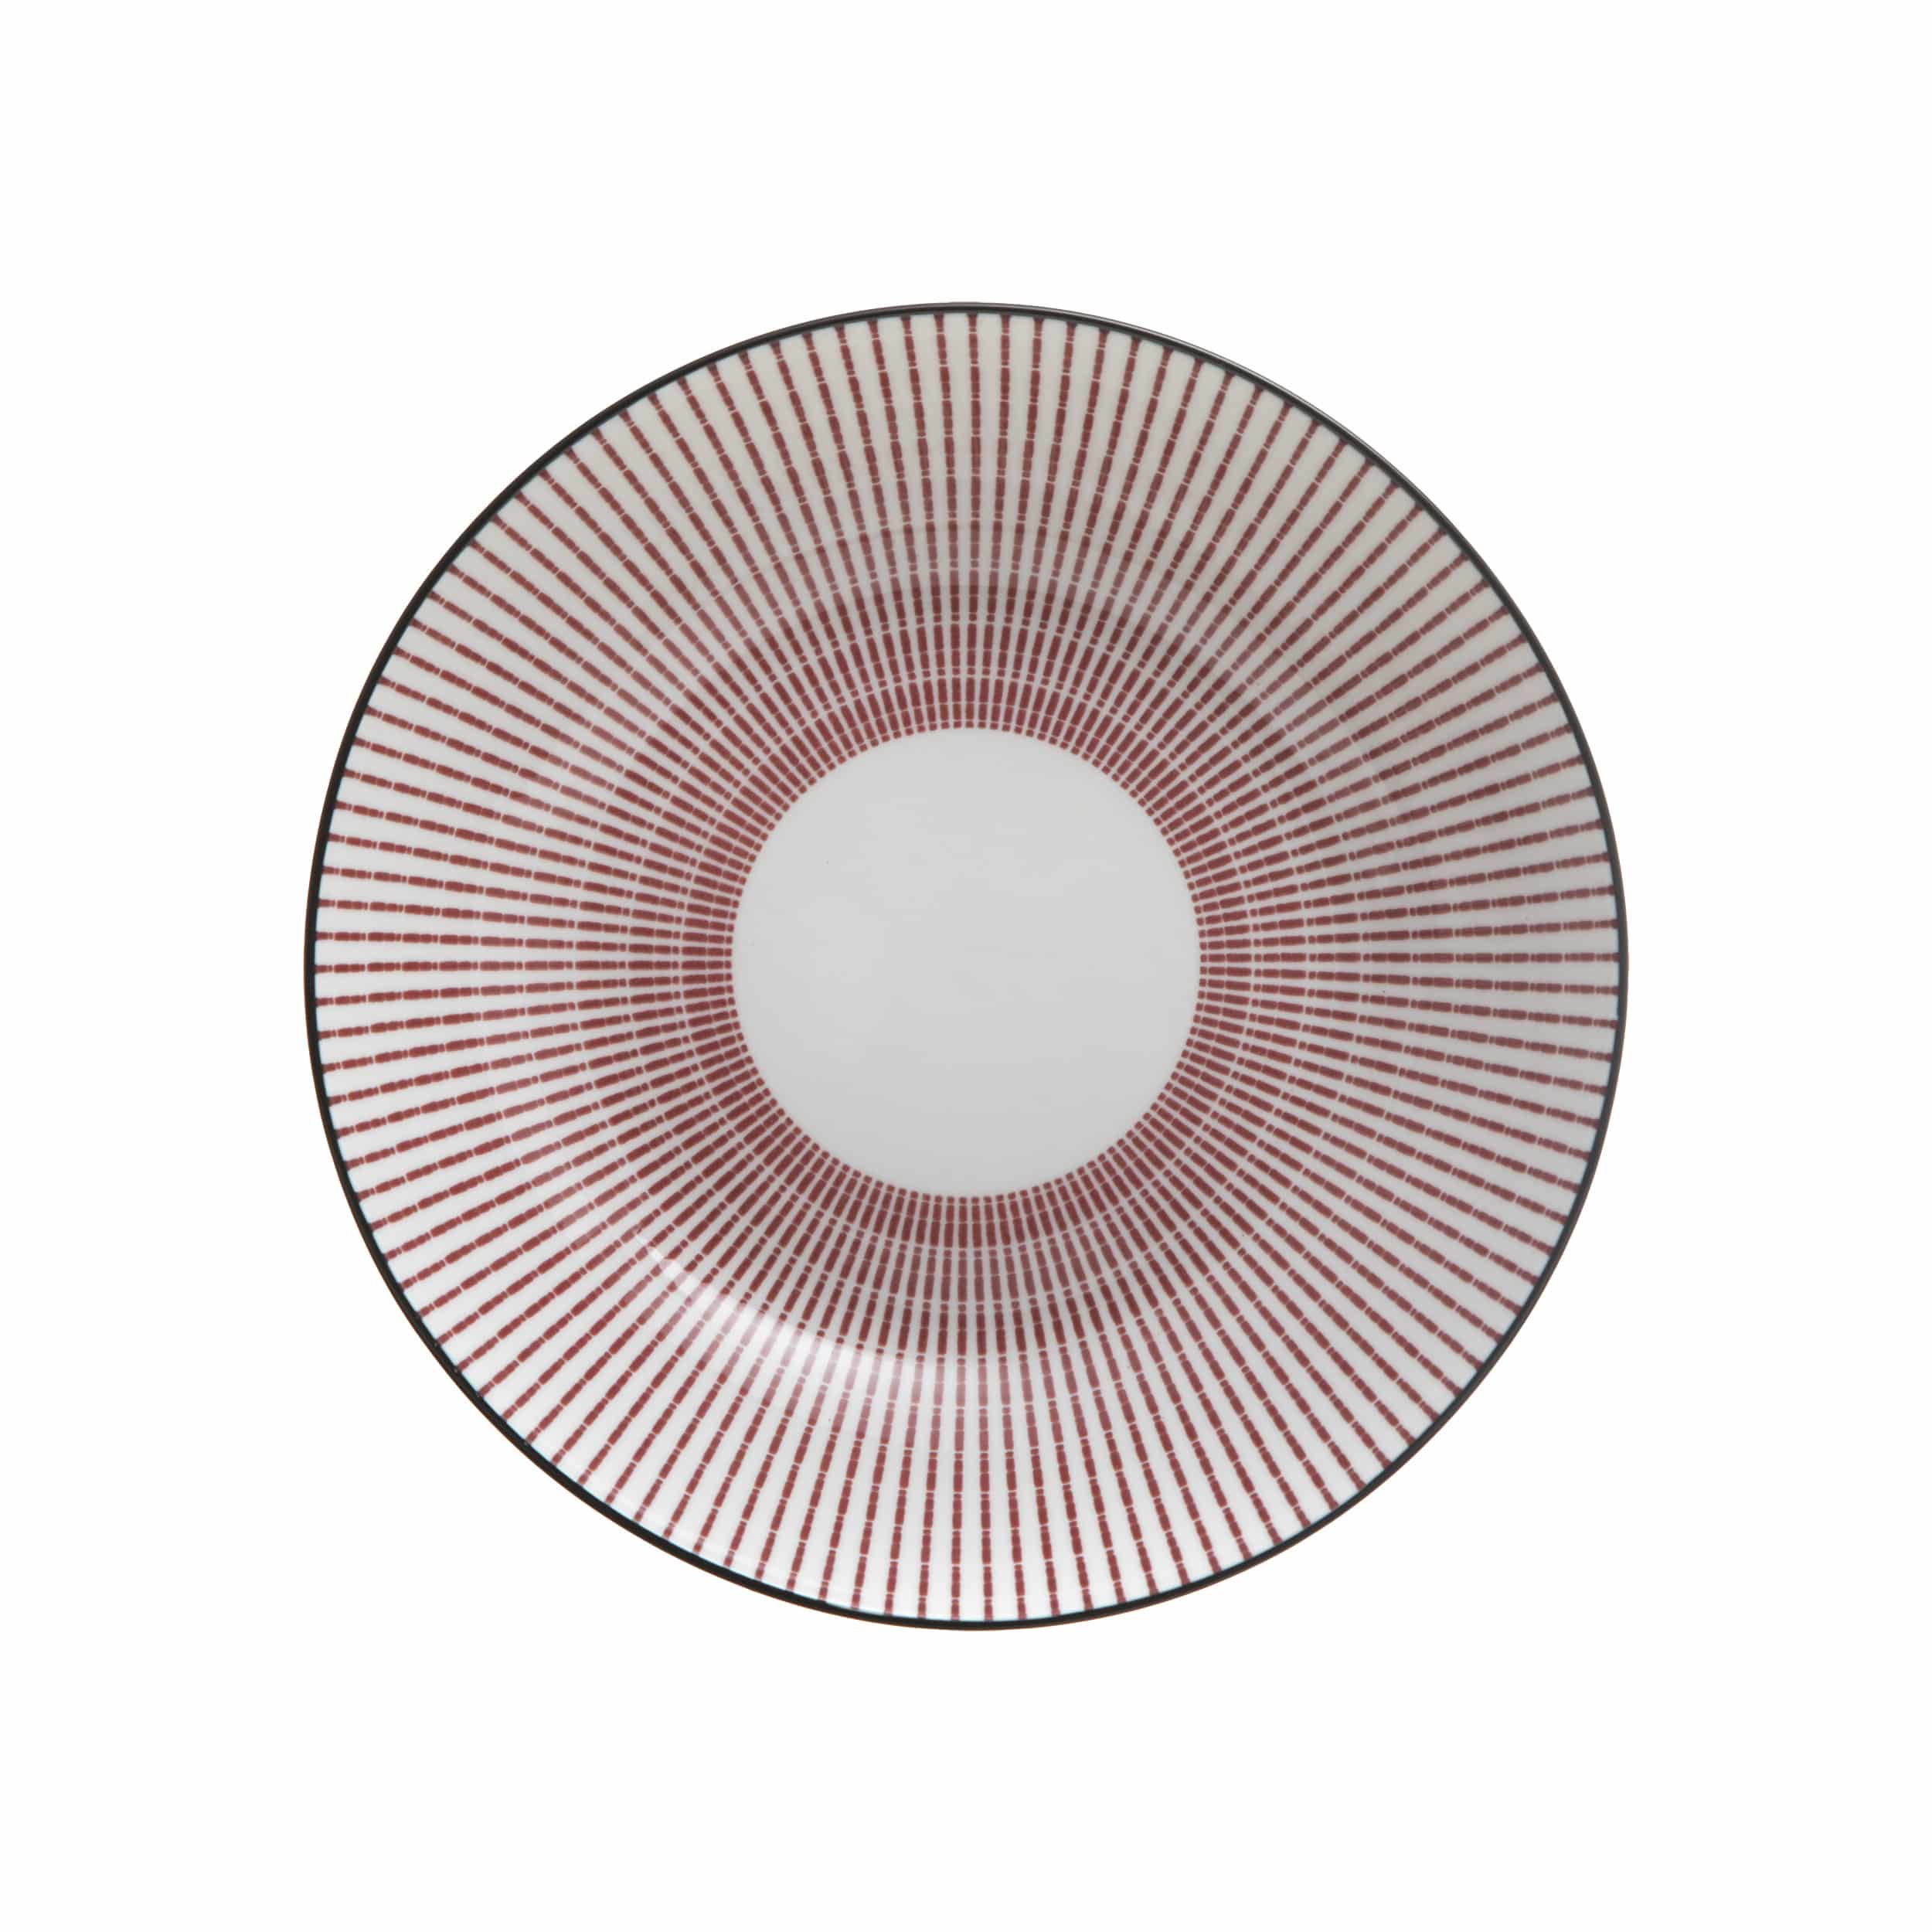 6 persoons Servies Porselein Lunis Rood - 18-delig - Rood/Creme